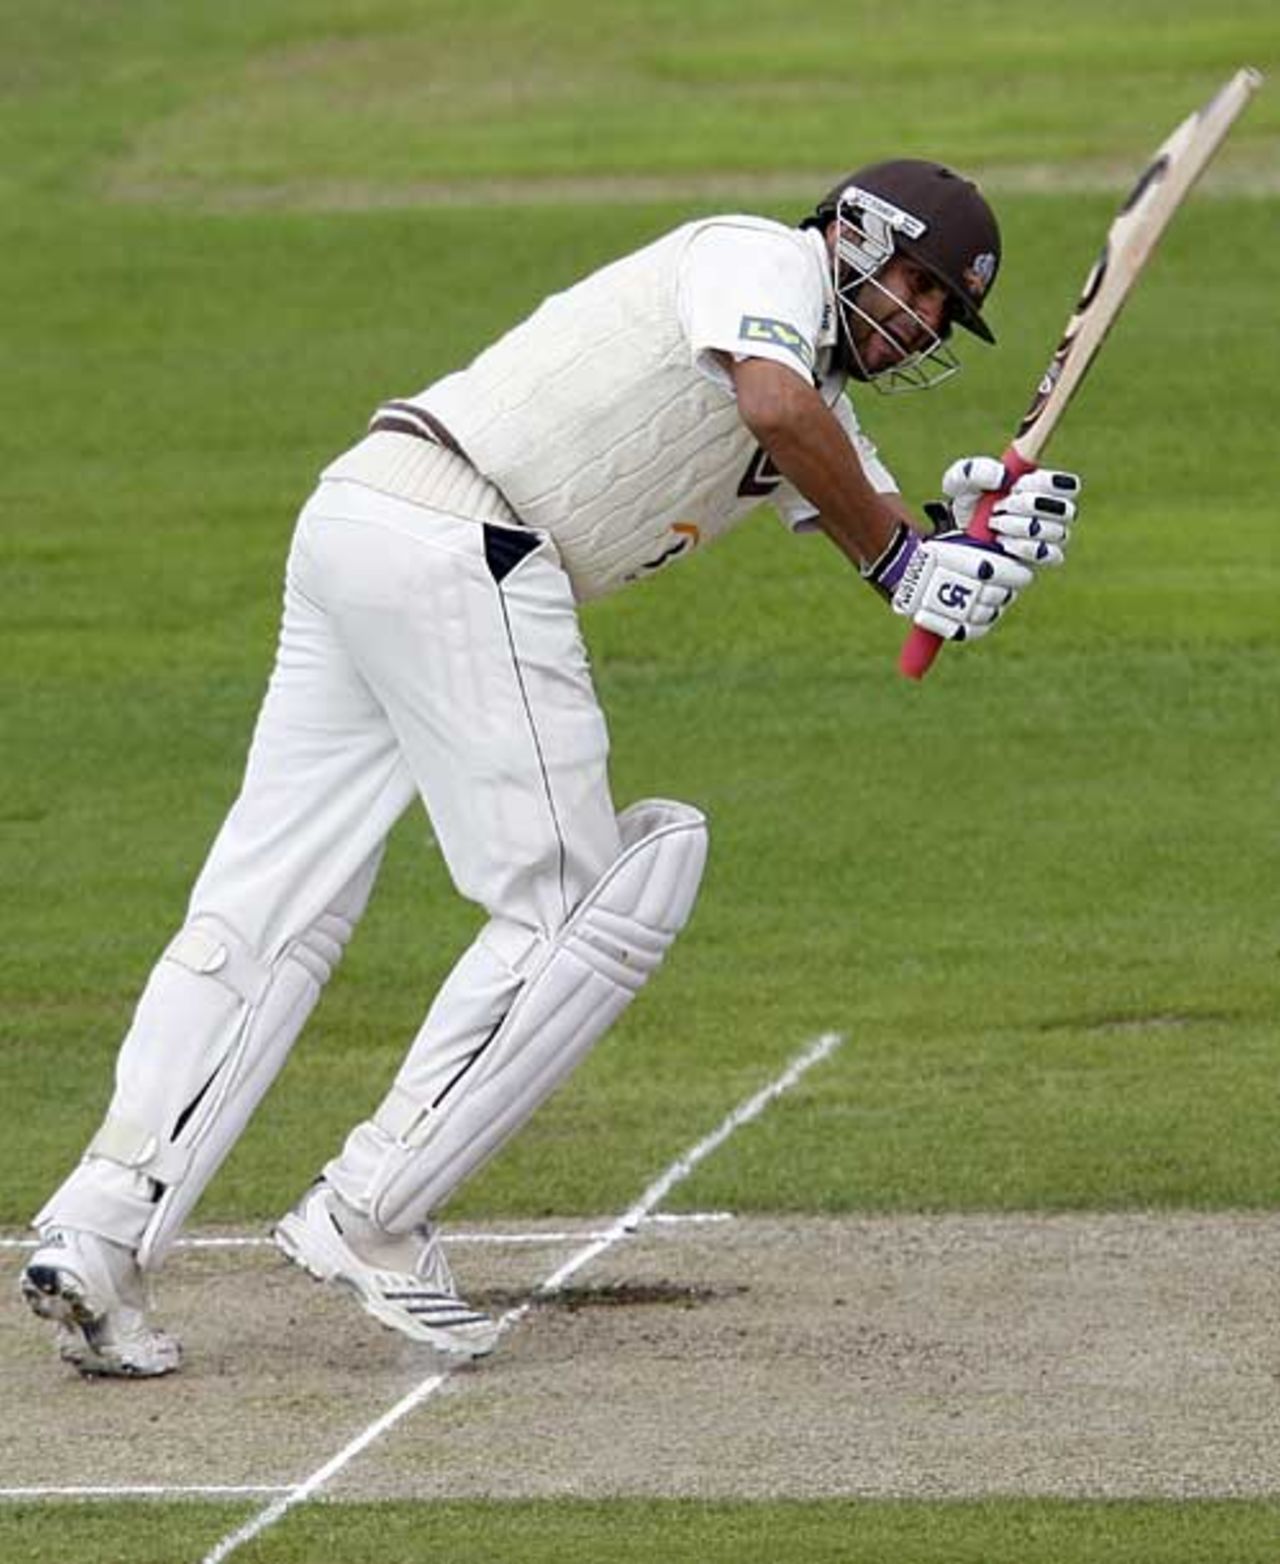 Usman Afzaal clips off his legs during his 89, Nottinghamshire v Surrey, County Championship, Trent Bridge, July 12, 2008